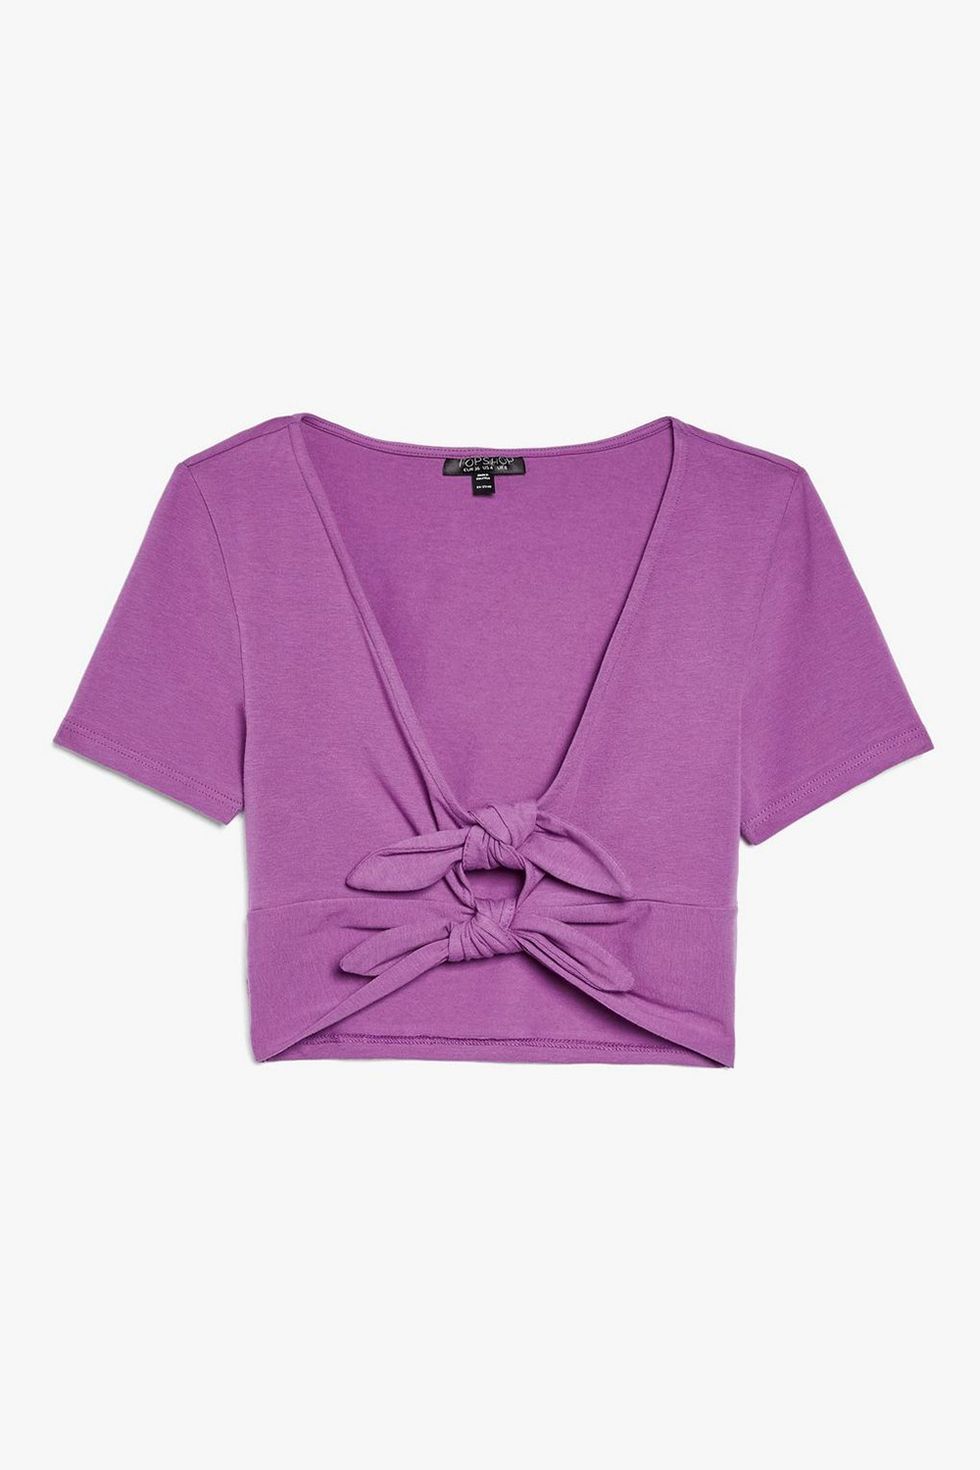 Clothing, Sleeve, T-shirt, Purple, Violet, Pink, Crop top, Magenta, Outerwear, Top, 